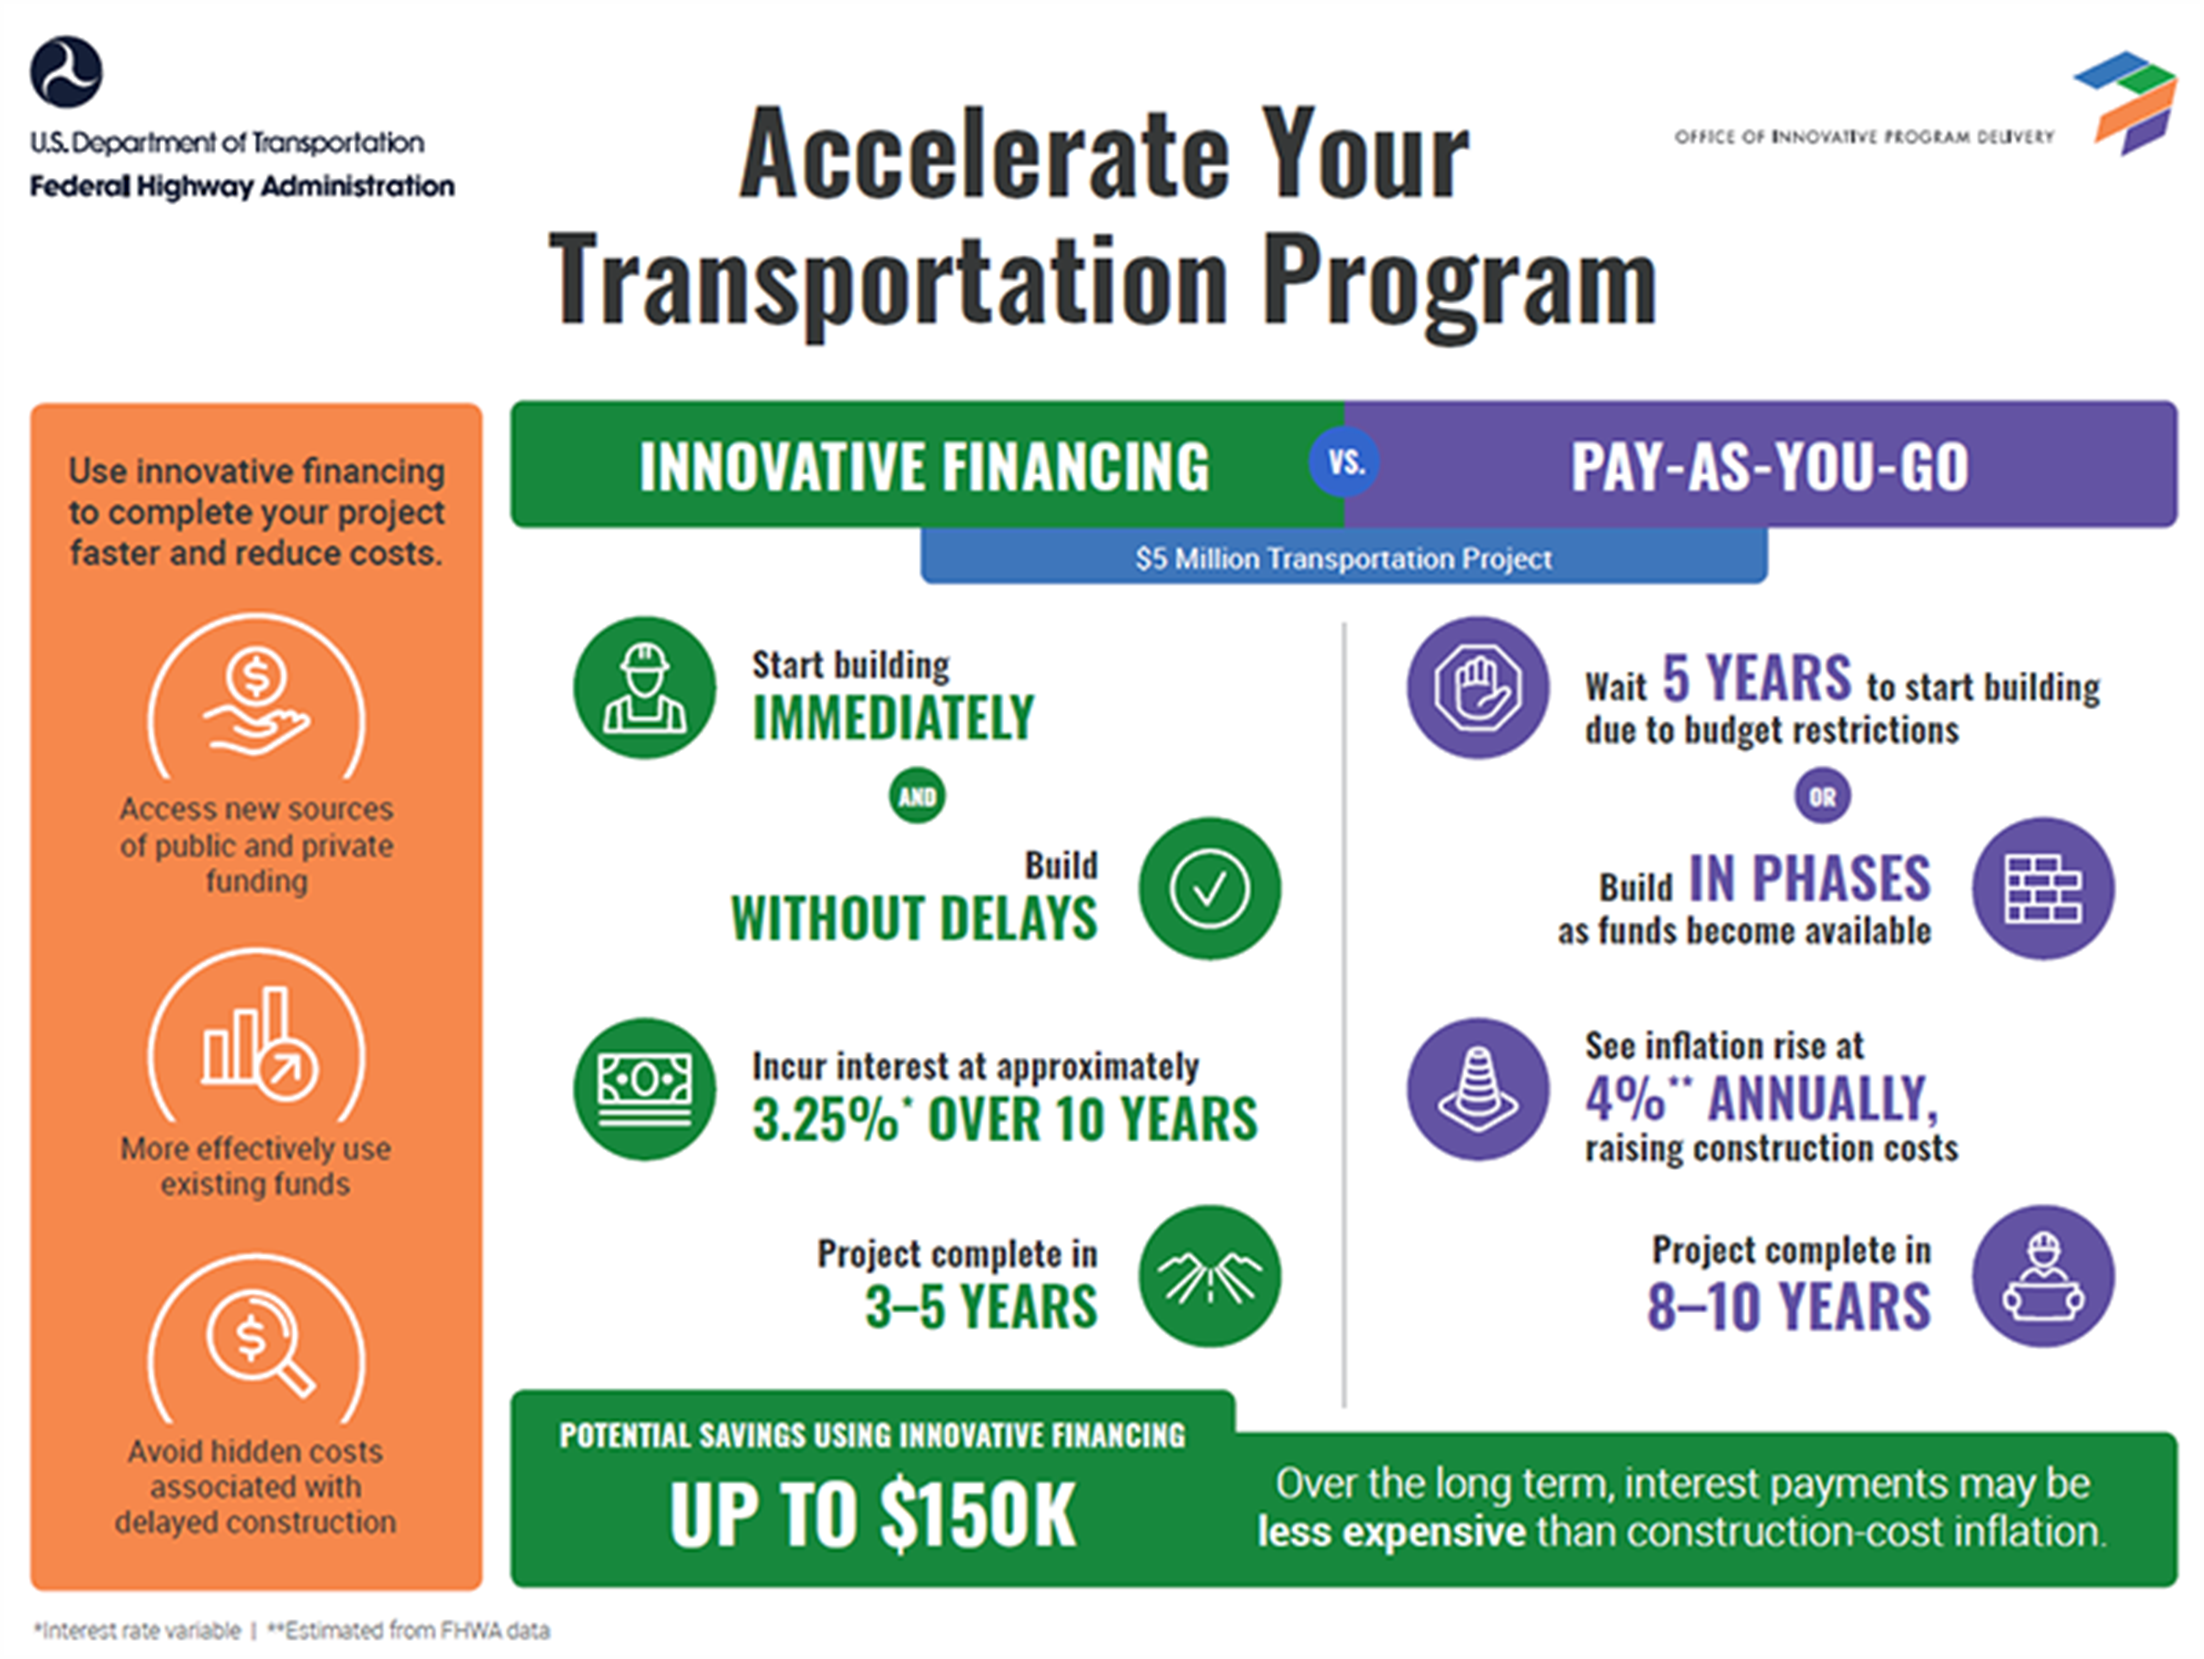 Accelerate Your Transportation Program Infographic. Detailed description is provided at link of next image below